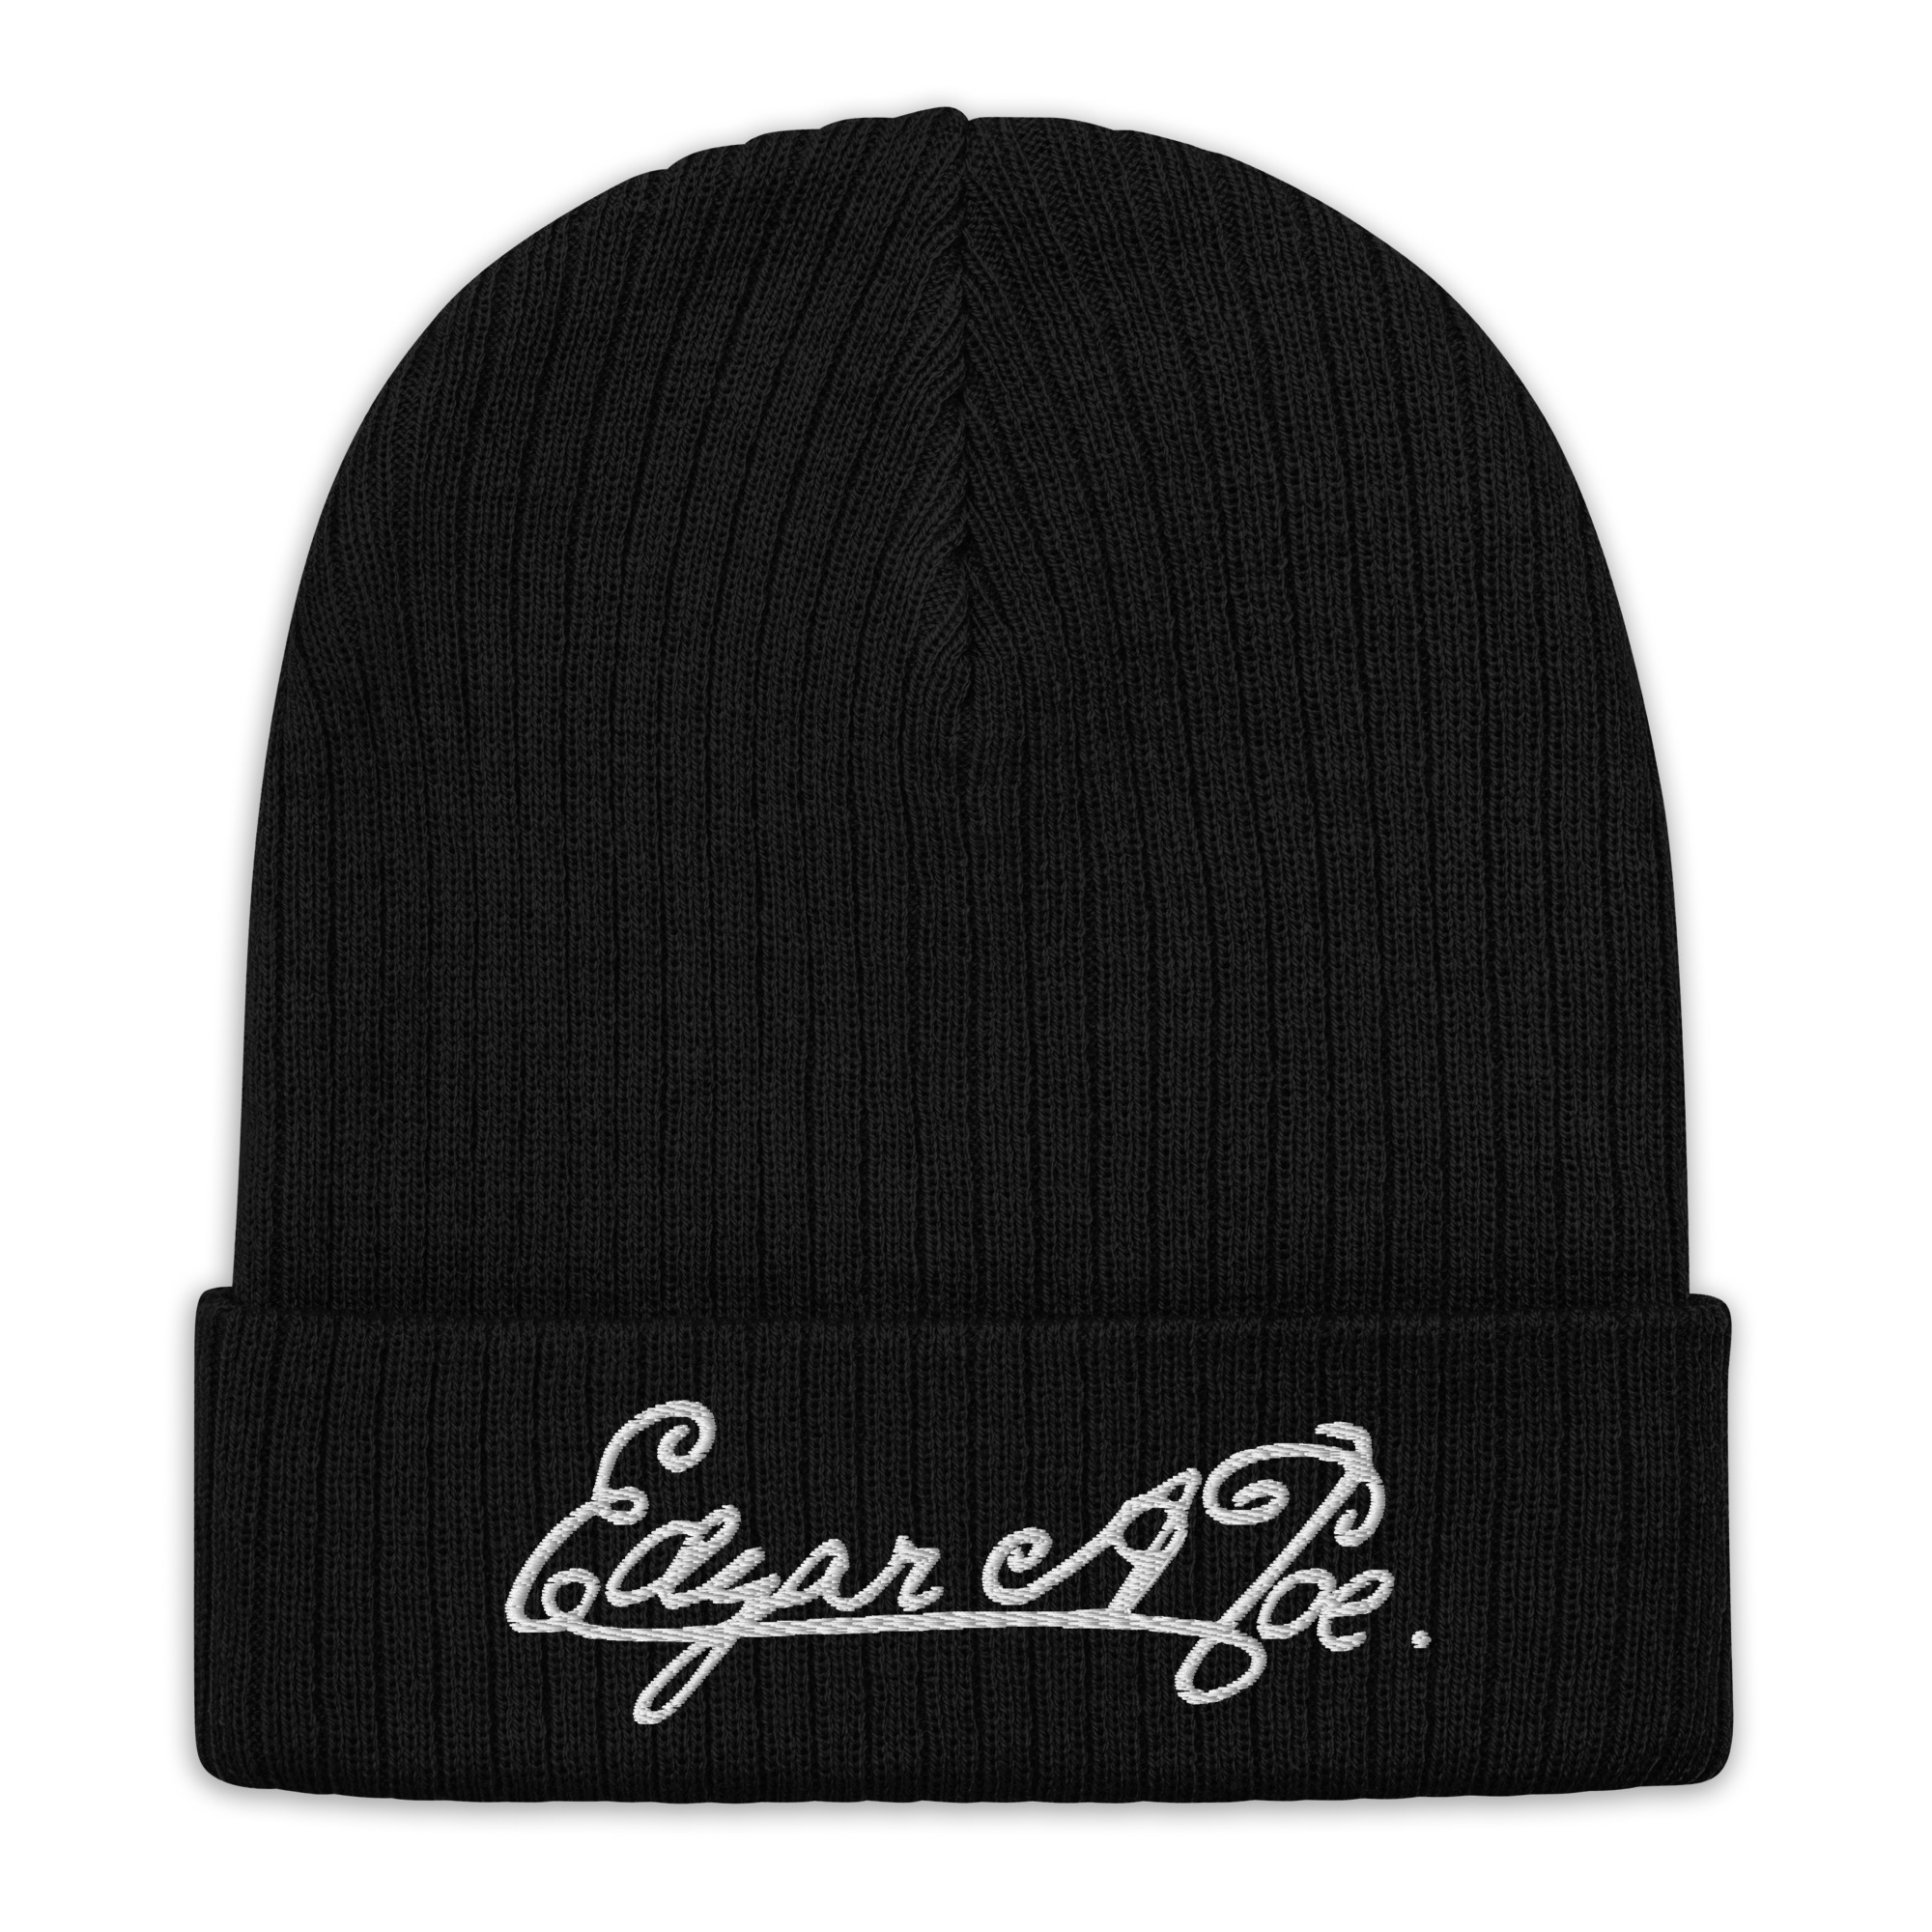 Featured image for “E.A.Poe Signature - Ribbed knit beanie”